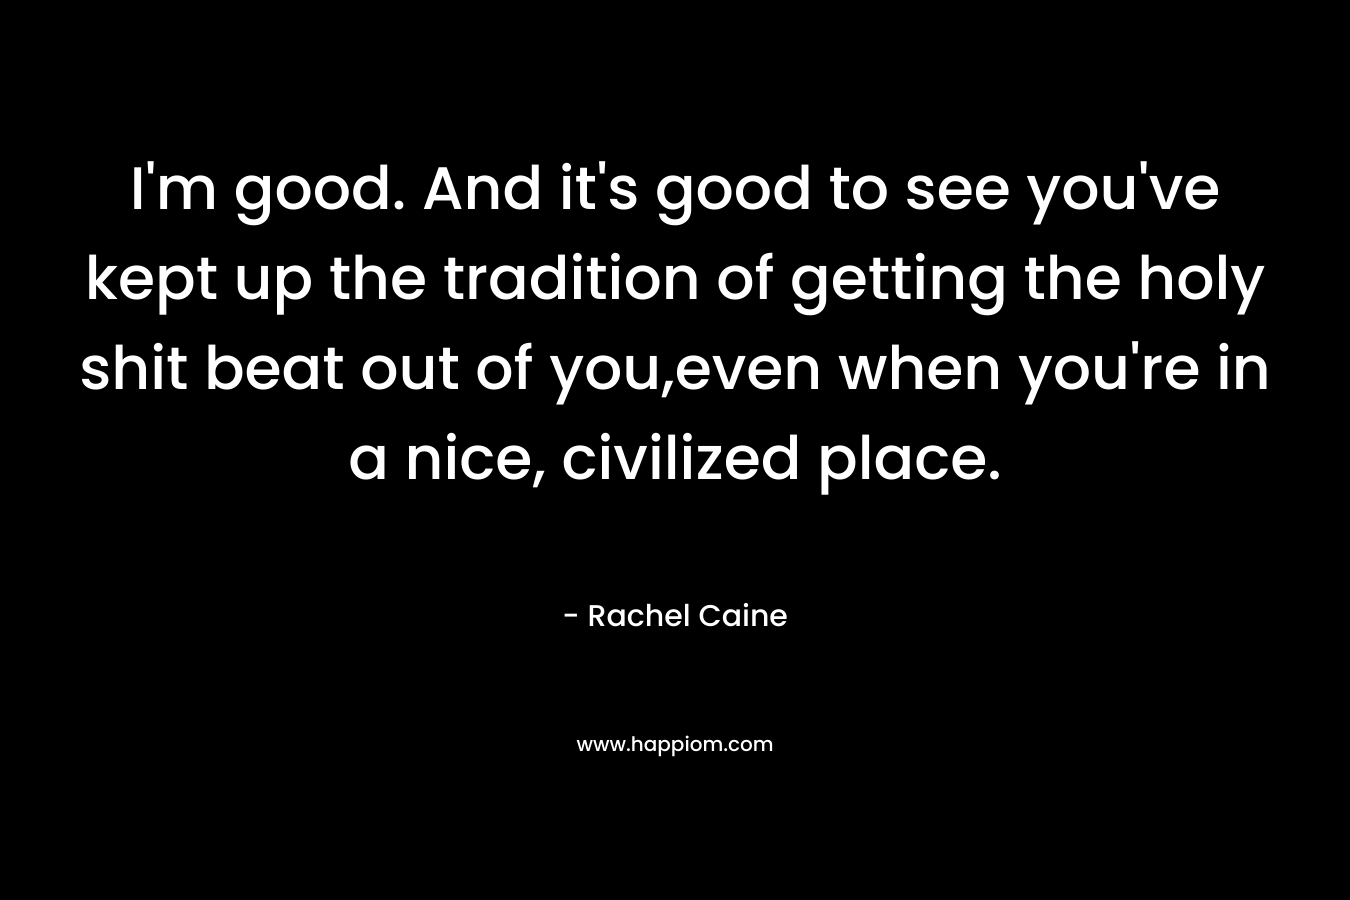 I’m good. And it’s good to see you’ve kept up the tradition of getting the holy shit beat out of you,even when you’re in a nice, civilized place. – Rachel Caine